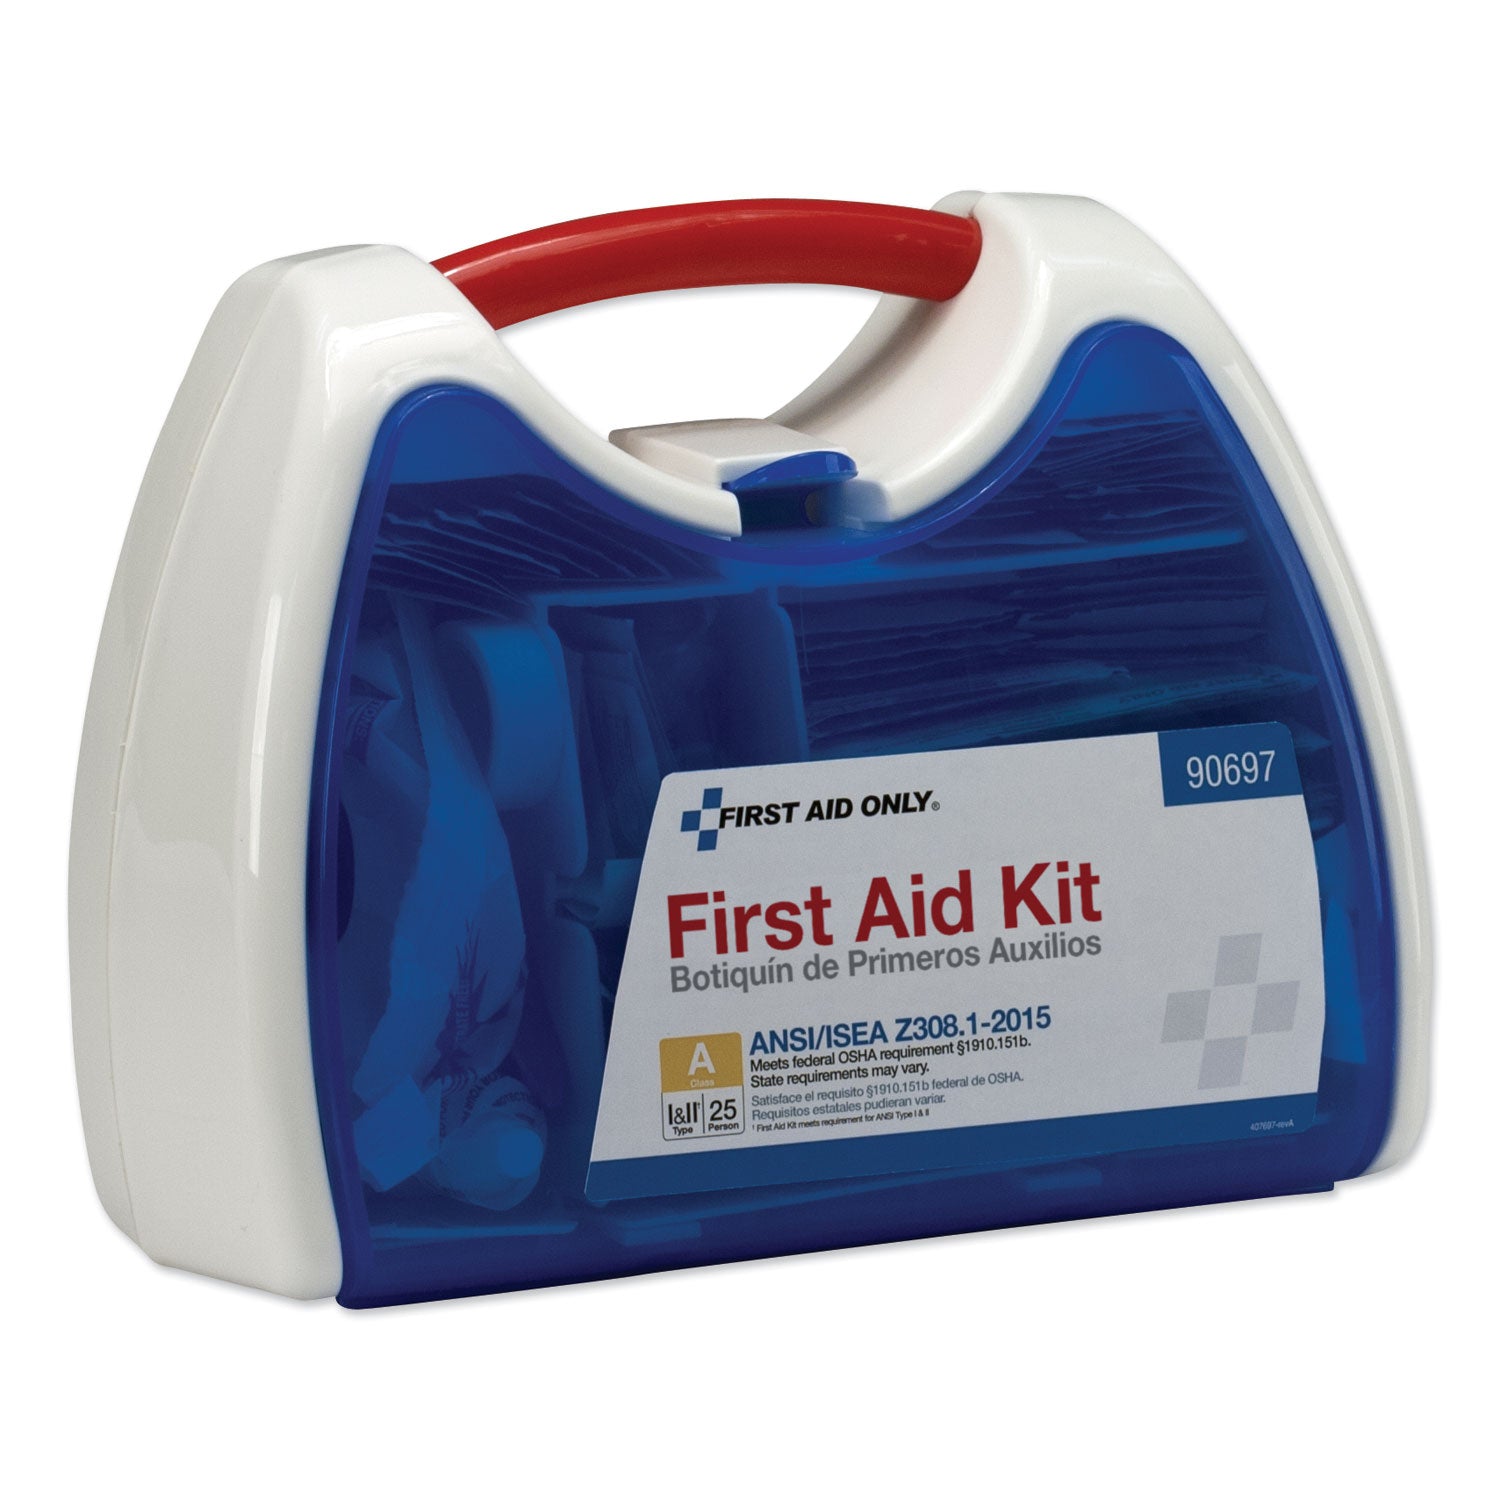 readycare-first-aid-kit-for-25-people-ansi-a+-139-pieces-plastic-case_fao90697 - 2